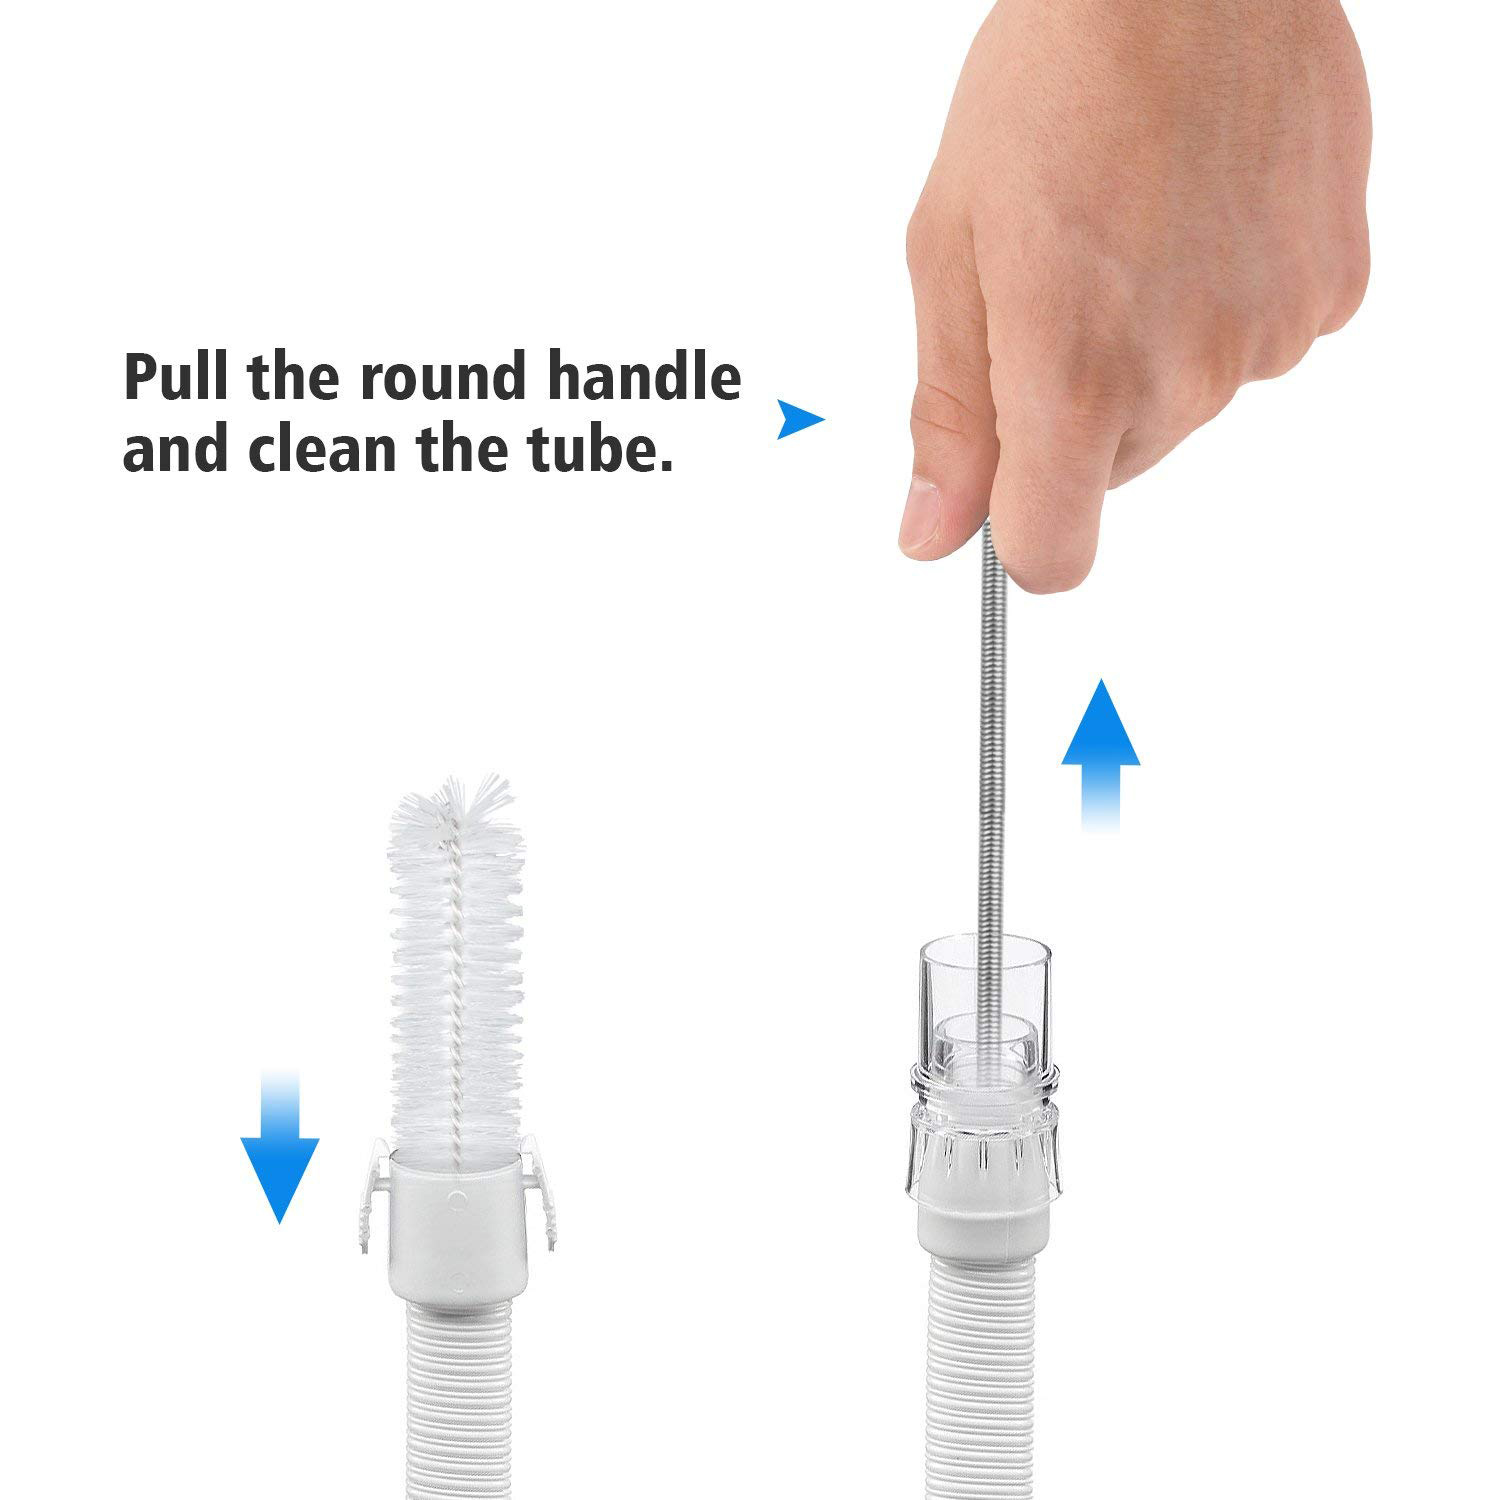 CPAP Tube Cleaning Brush - Flexible Stainless (6 Feet) Plus Handy Brush (10  Inches) fits Standard 22mm Diameter Tubing